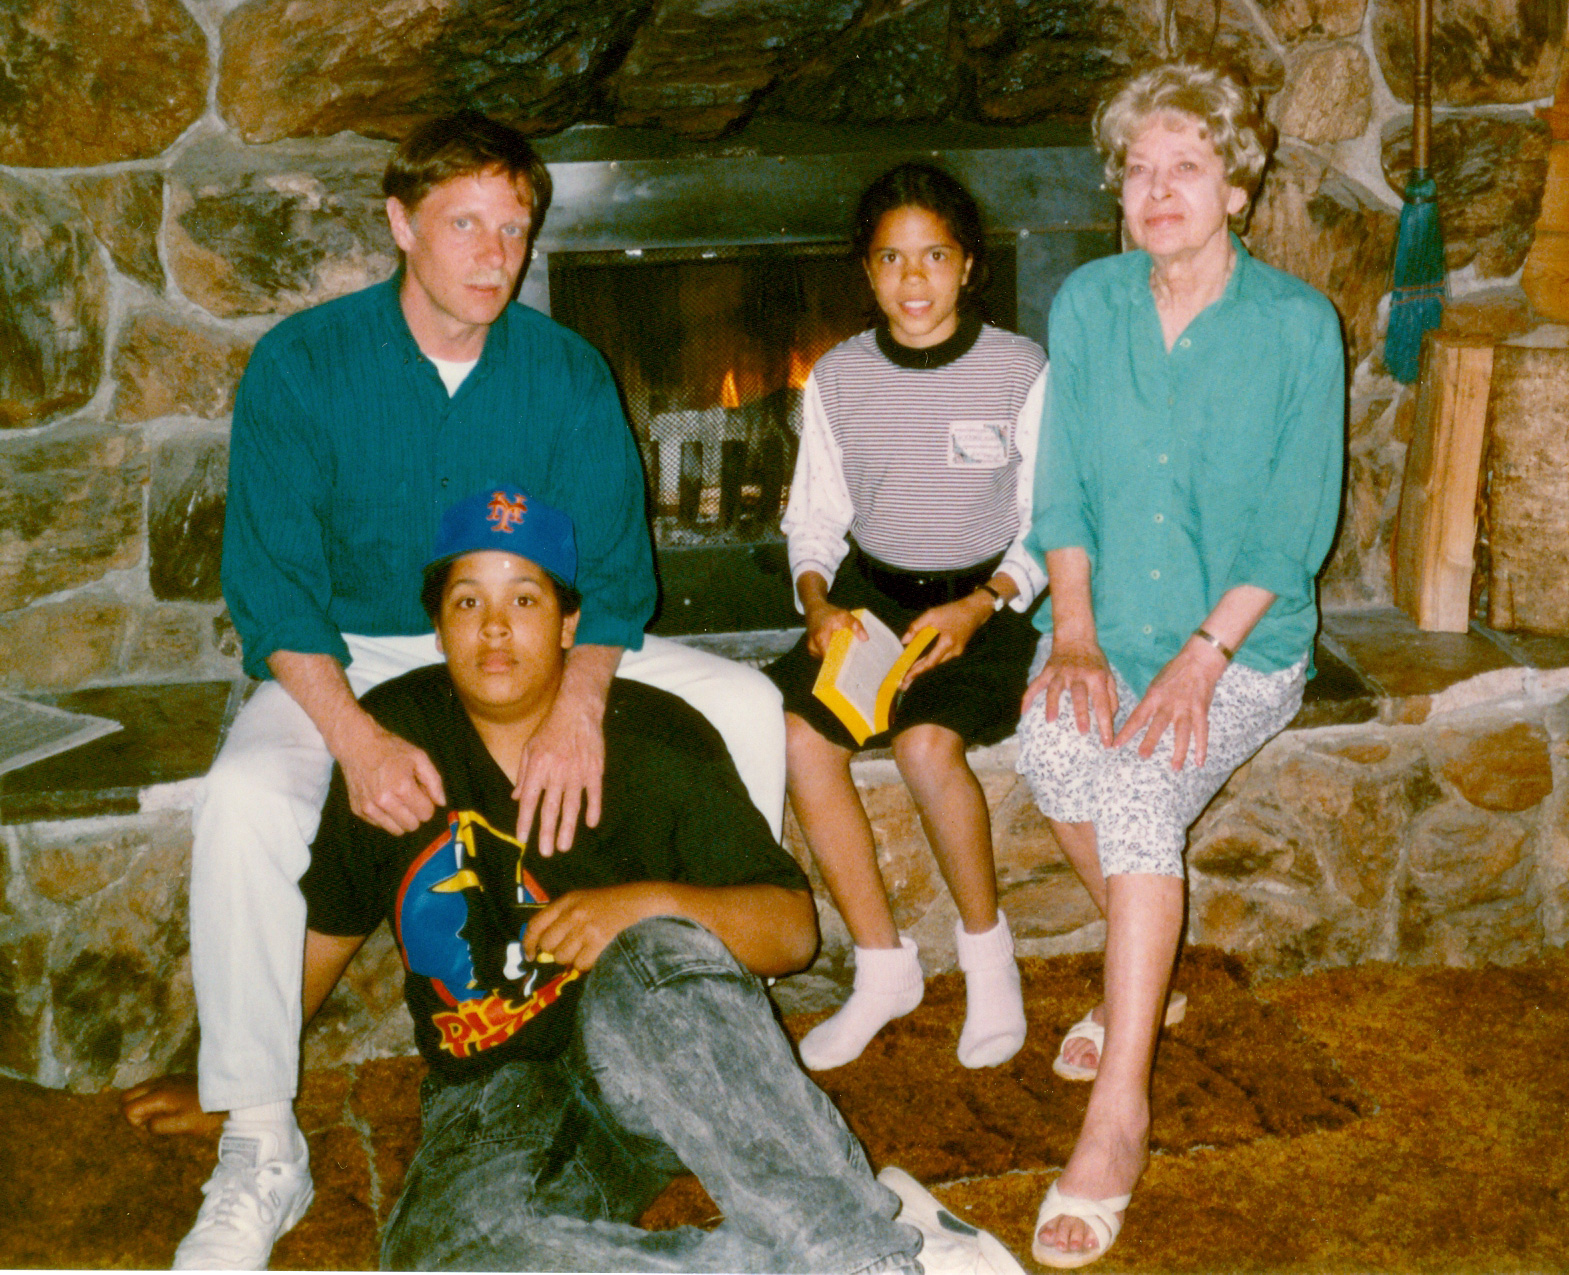 Us with my Mom in Oregon